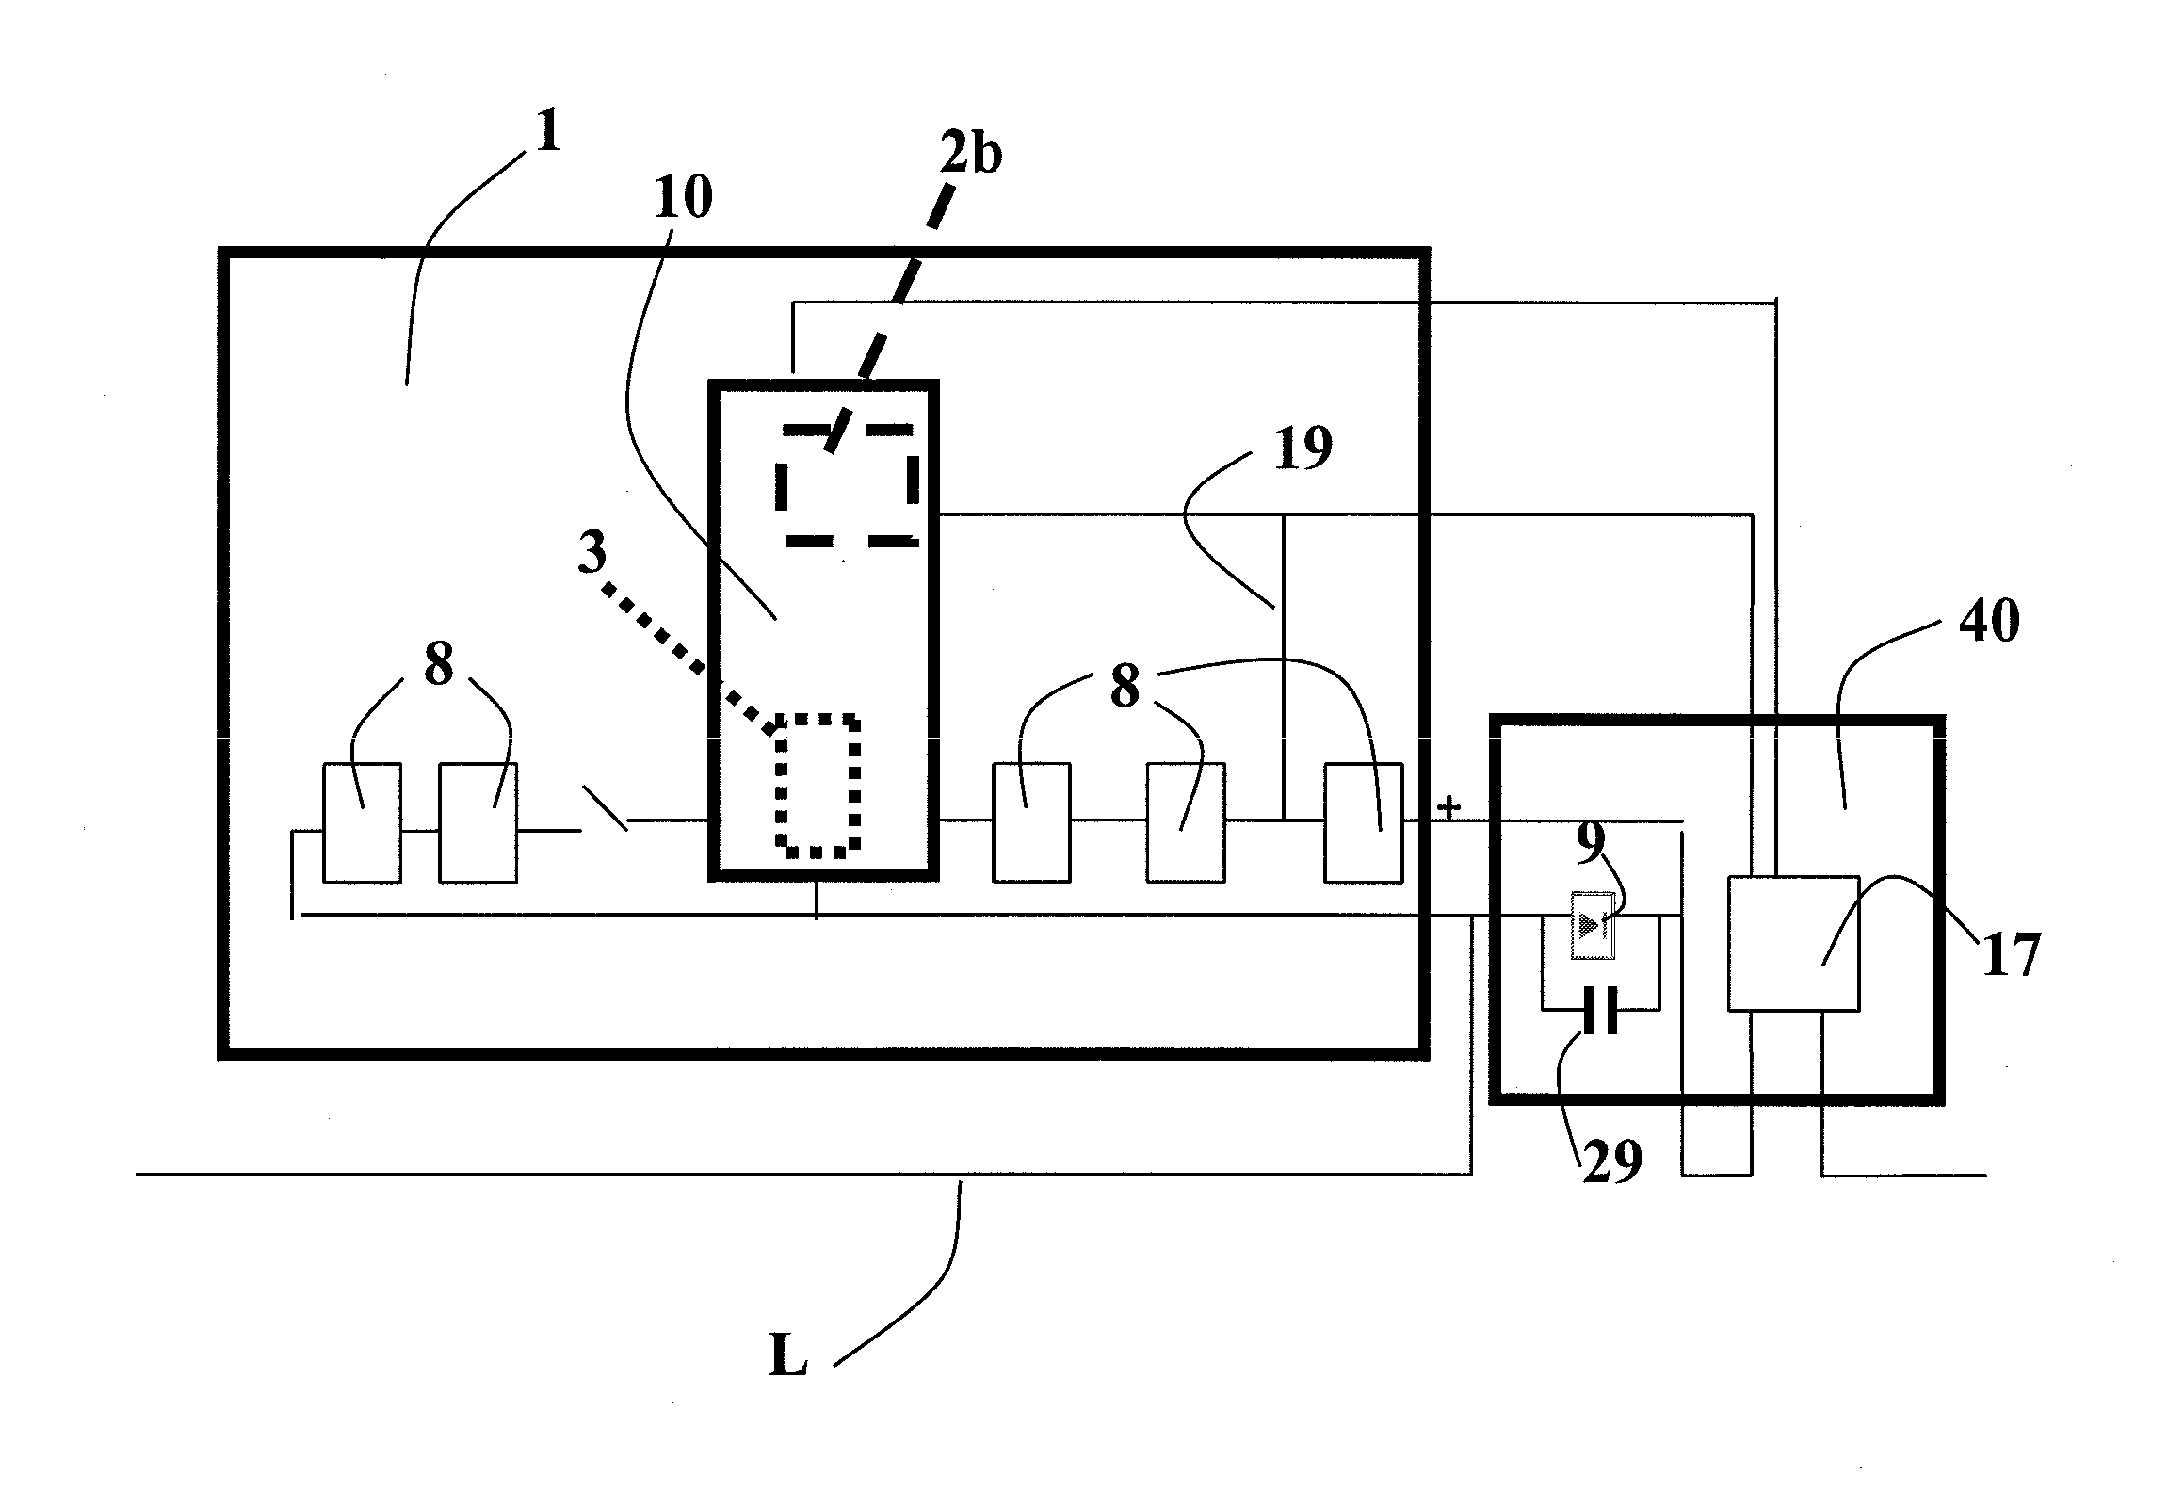 Antitheft and monitoring system for photovoltaic panels